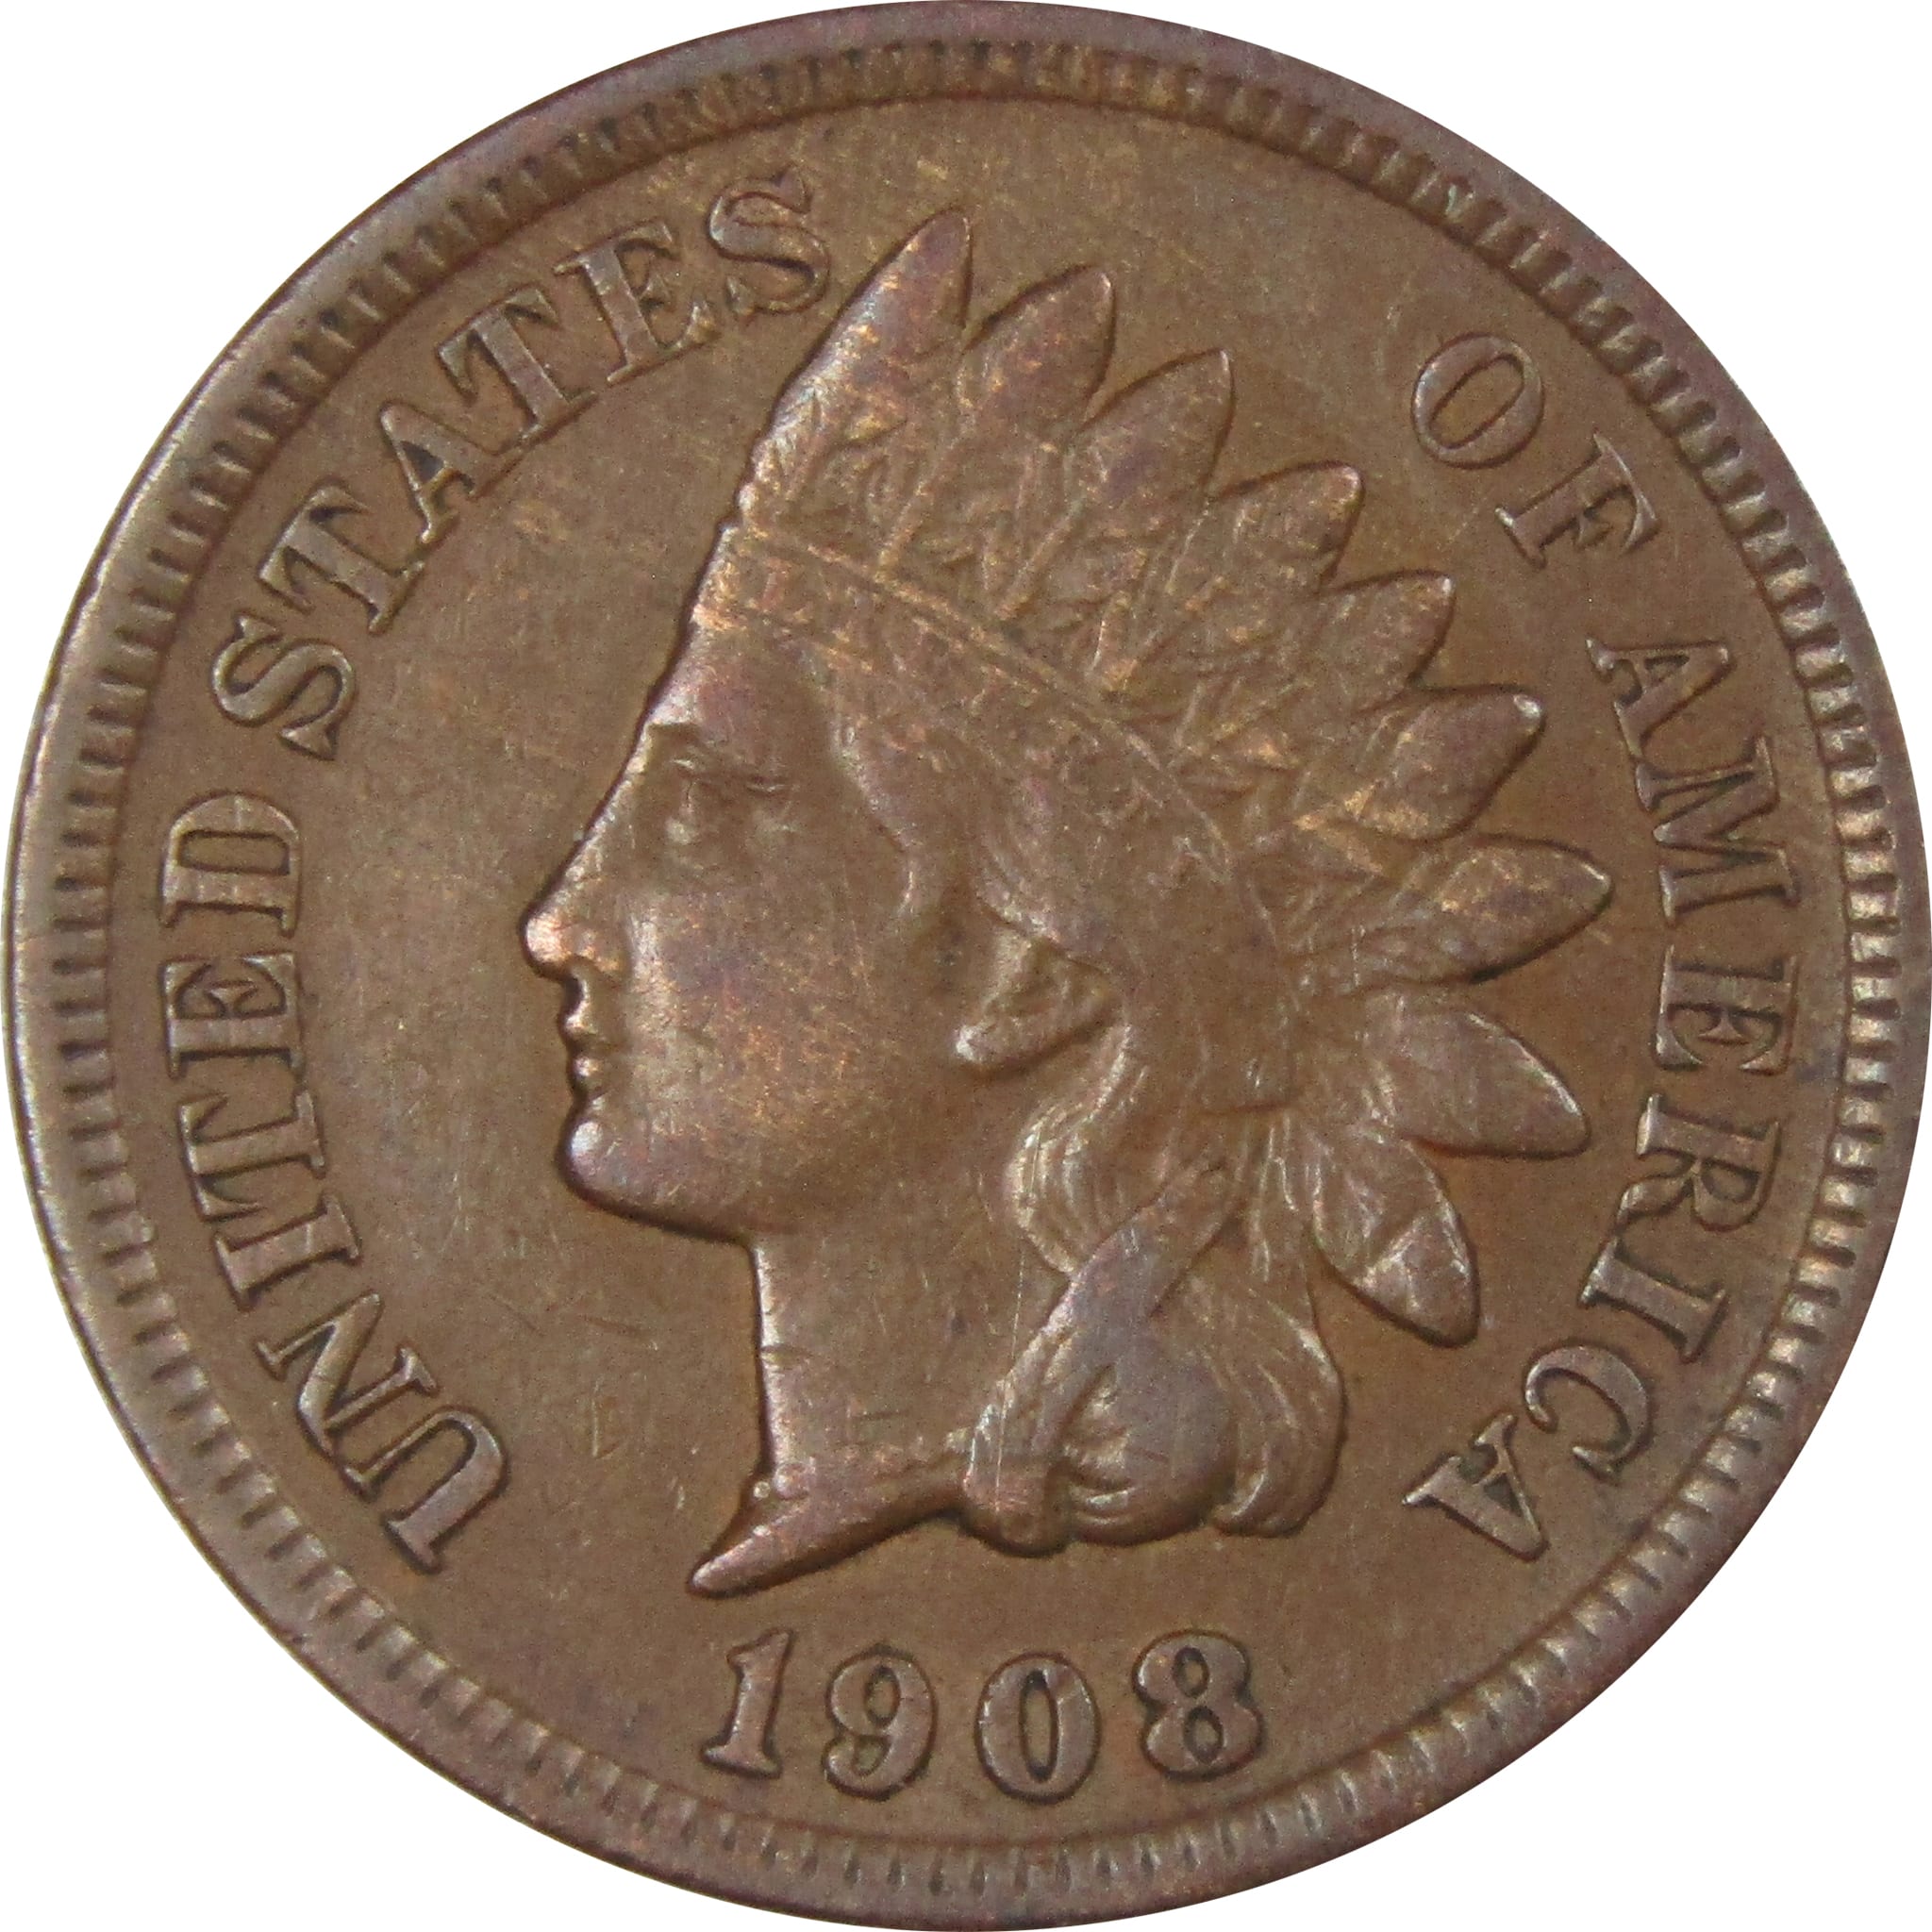 1908 S Indian Head Cent XF EF Extremely Fine Penny 1c Coin SKU:IPC7359